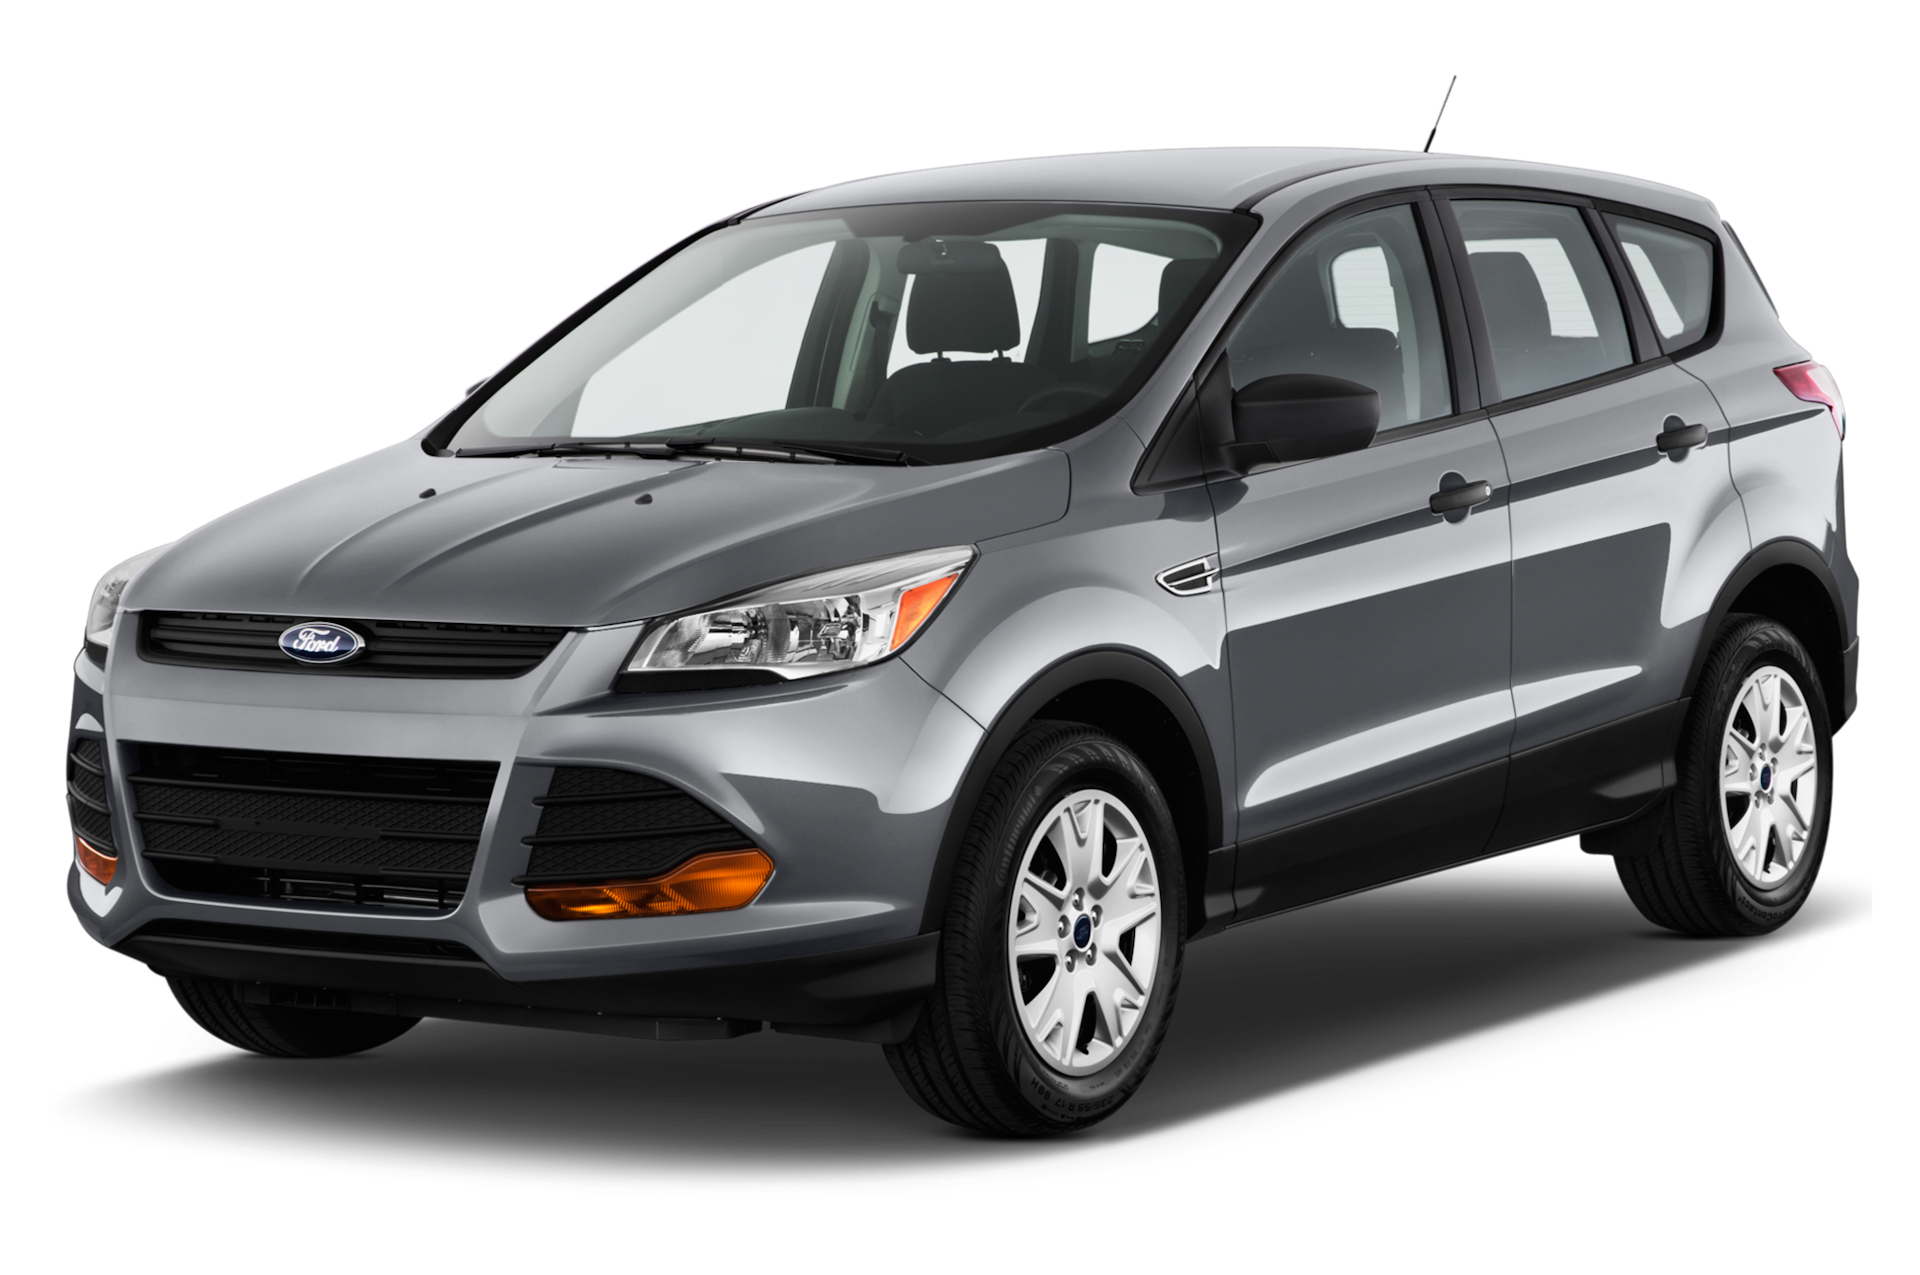 2016 Ford Escape Prices, Reviews, and Photos - MotorTrend